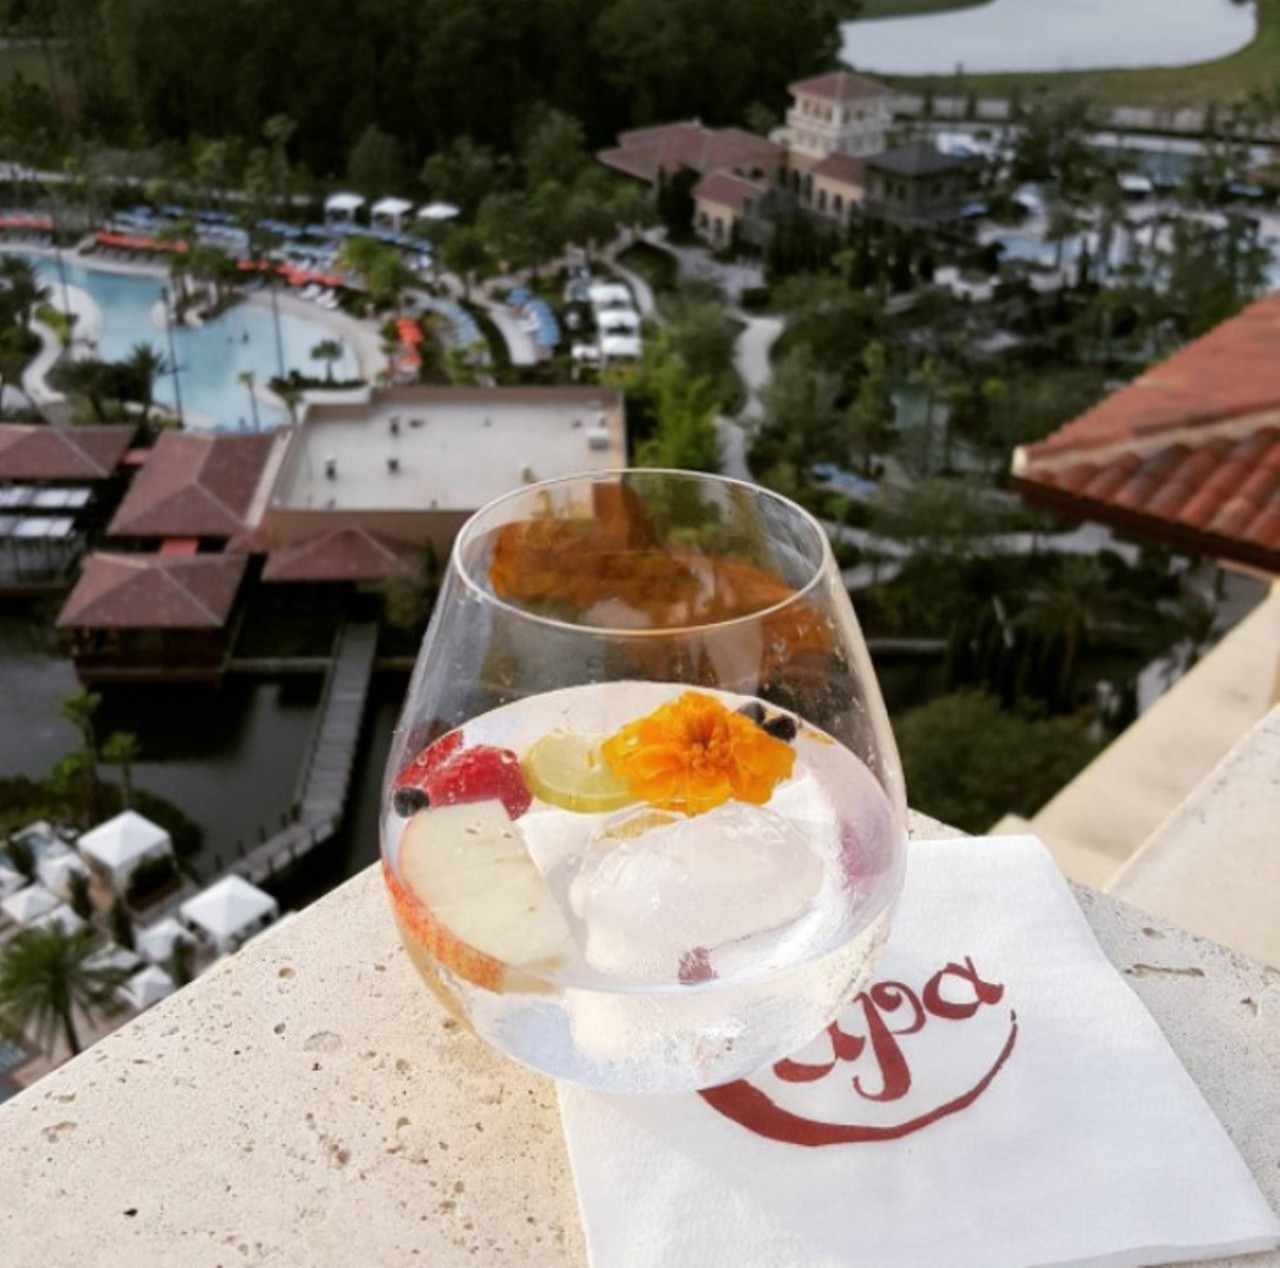 Capa Rooftop Spanish Steakhouse
What to drink: One of these elegantly constructed waters
Photo via marilyngrussell/Instagram